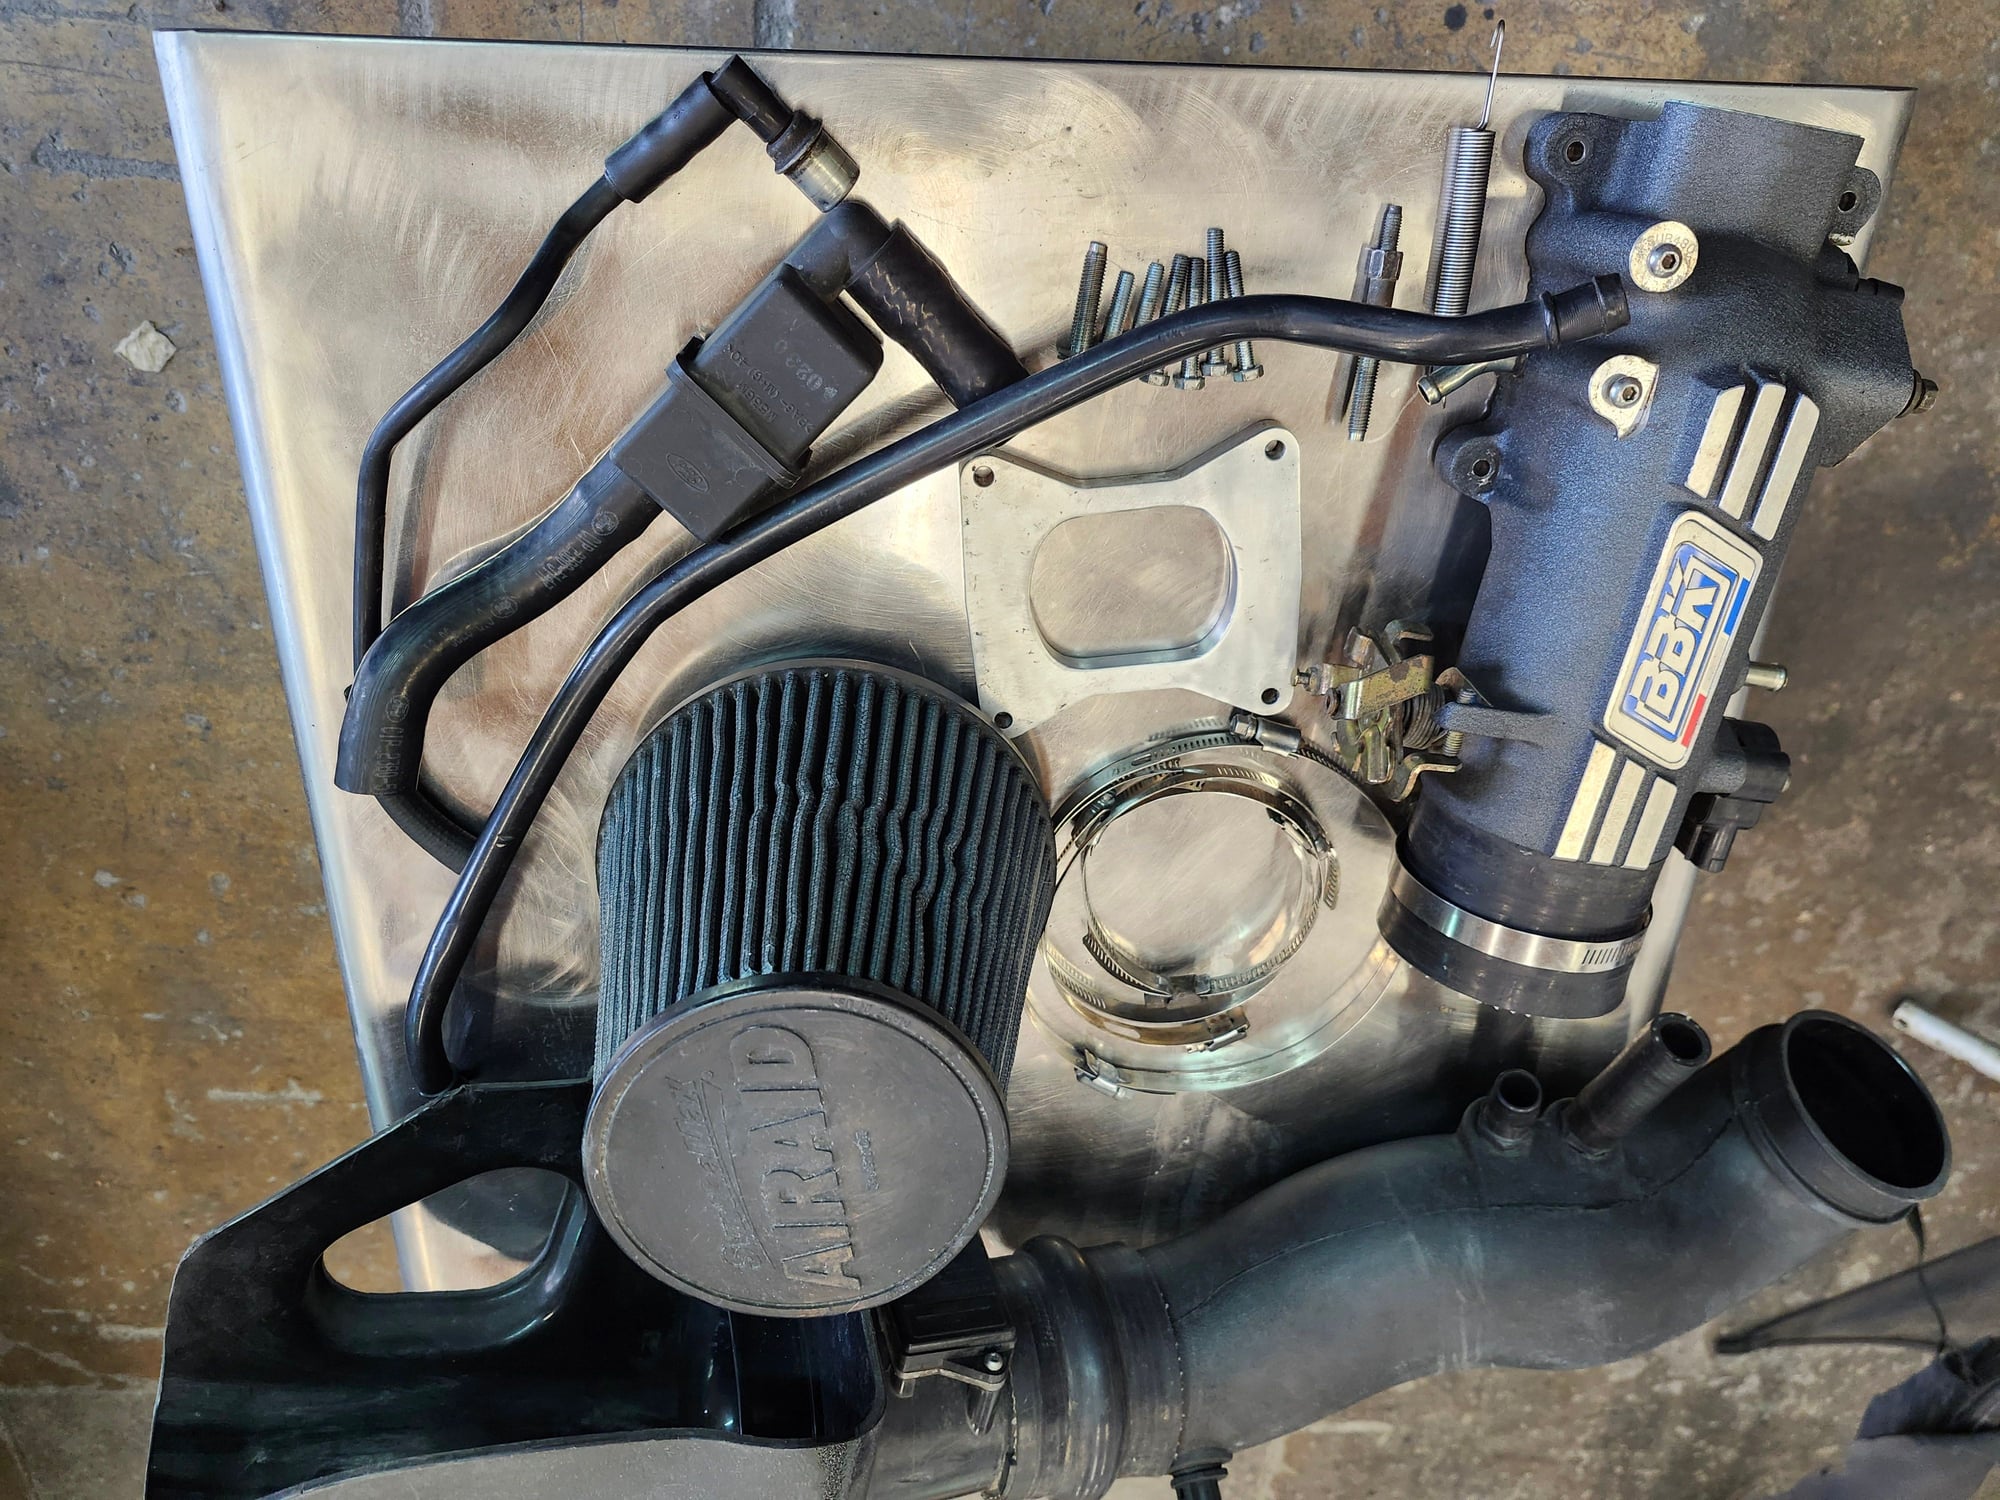 Engine - Intake/Fuel - 78mm BBK THROTTLE BODY INTAKE & AIR RAID COLD FILTER AND HOUSING - Used - 1999 to 2004 Ford Mustang - Moorpark, CA 93021, United States